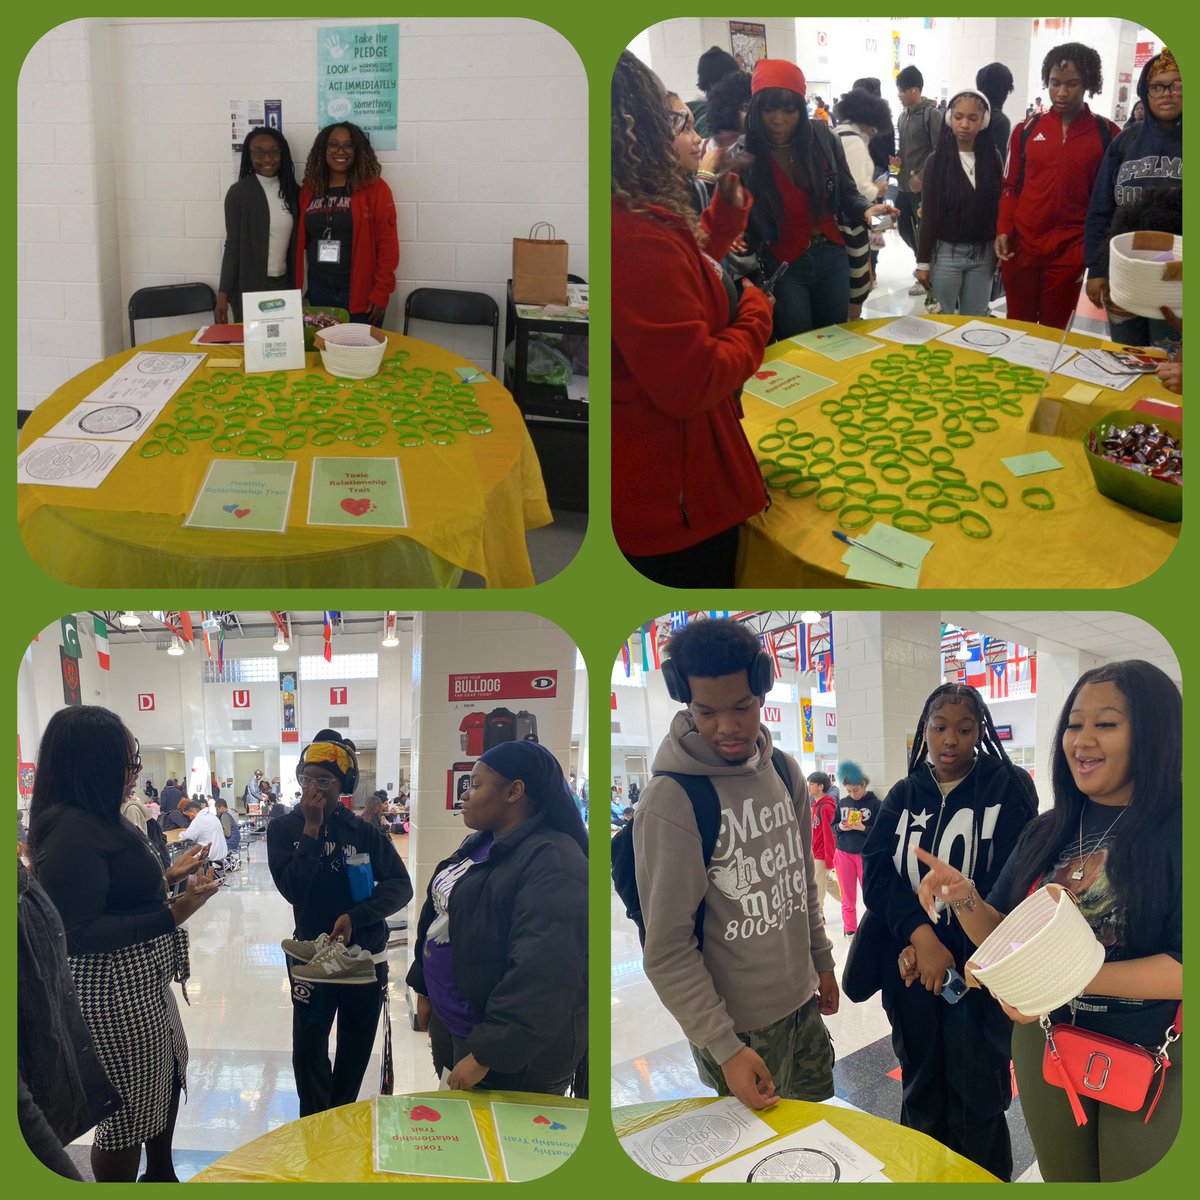 DHS Peer Meditation held our annual See Something Say Something initiative. We had our Social Worker Director @FaleshaReynolds helping give healthy tips to students and Ms. Kimble as our most trusted adult in the building. #sandyhookpromise # see somethingsaysomething @DHS_HCS